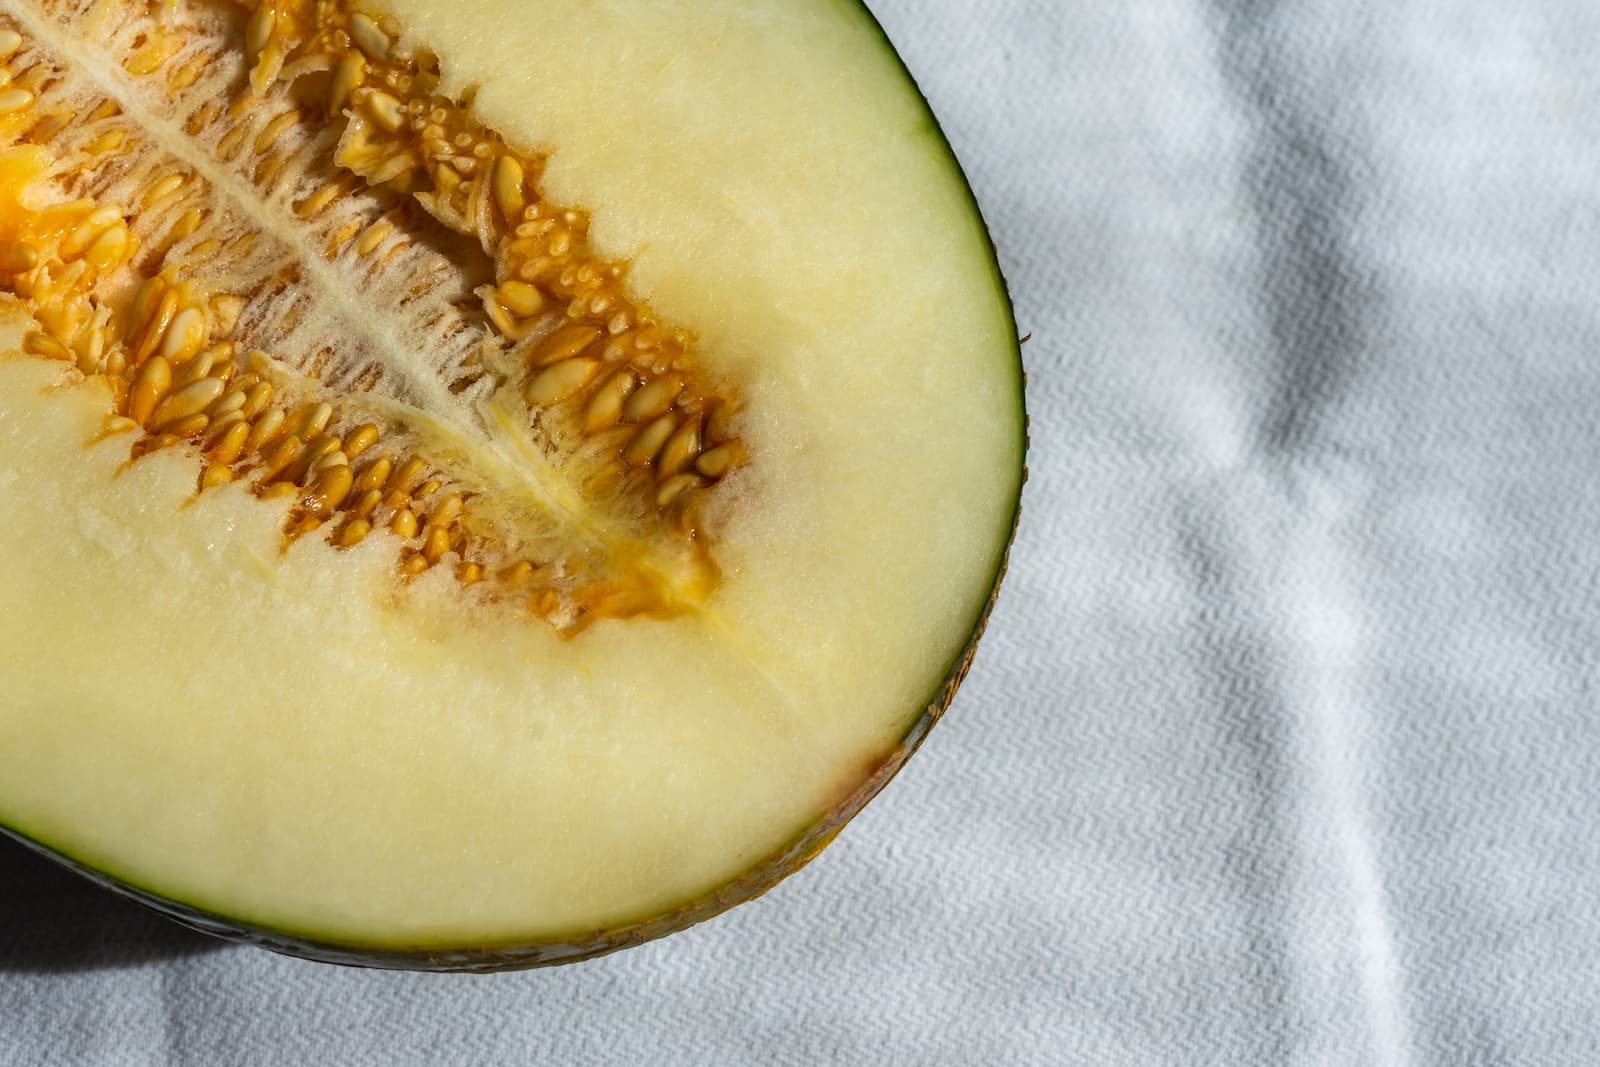 The melon: a sweet and juicy fruit that will liven up your dishes